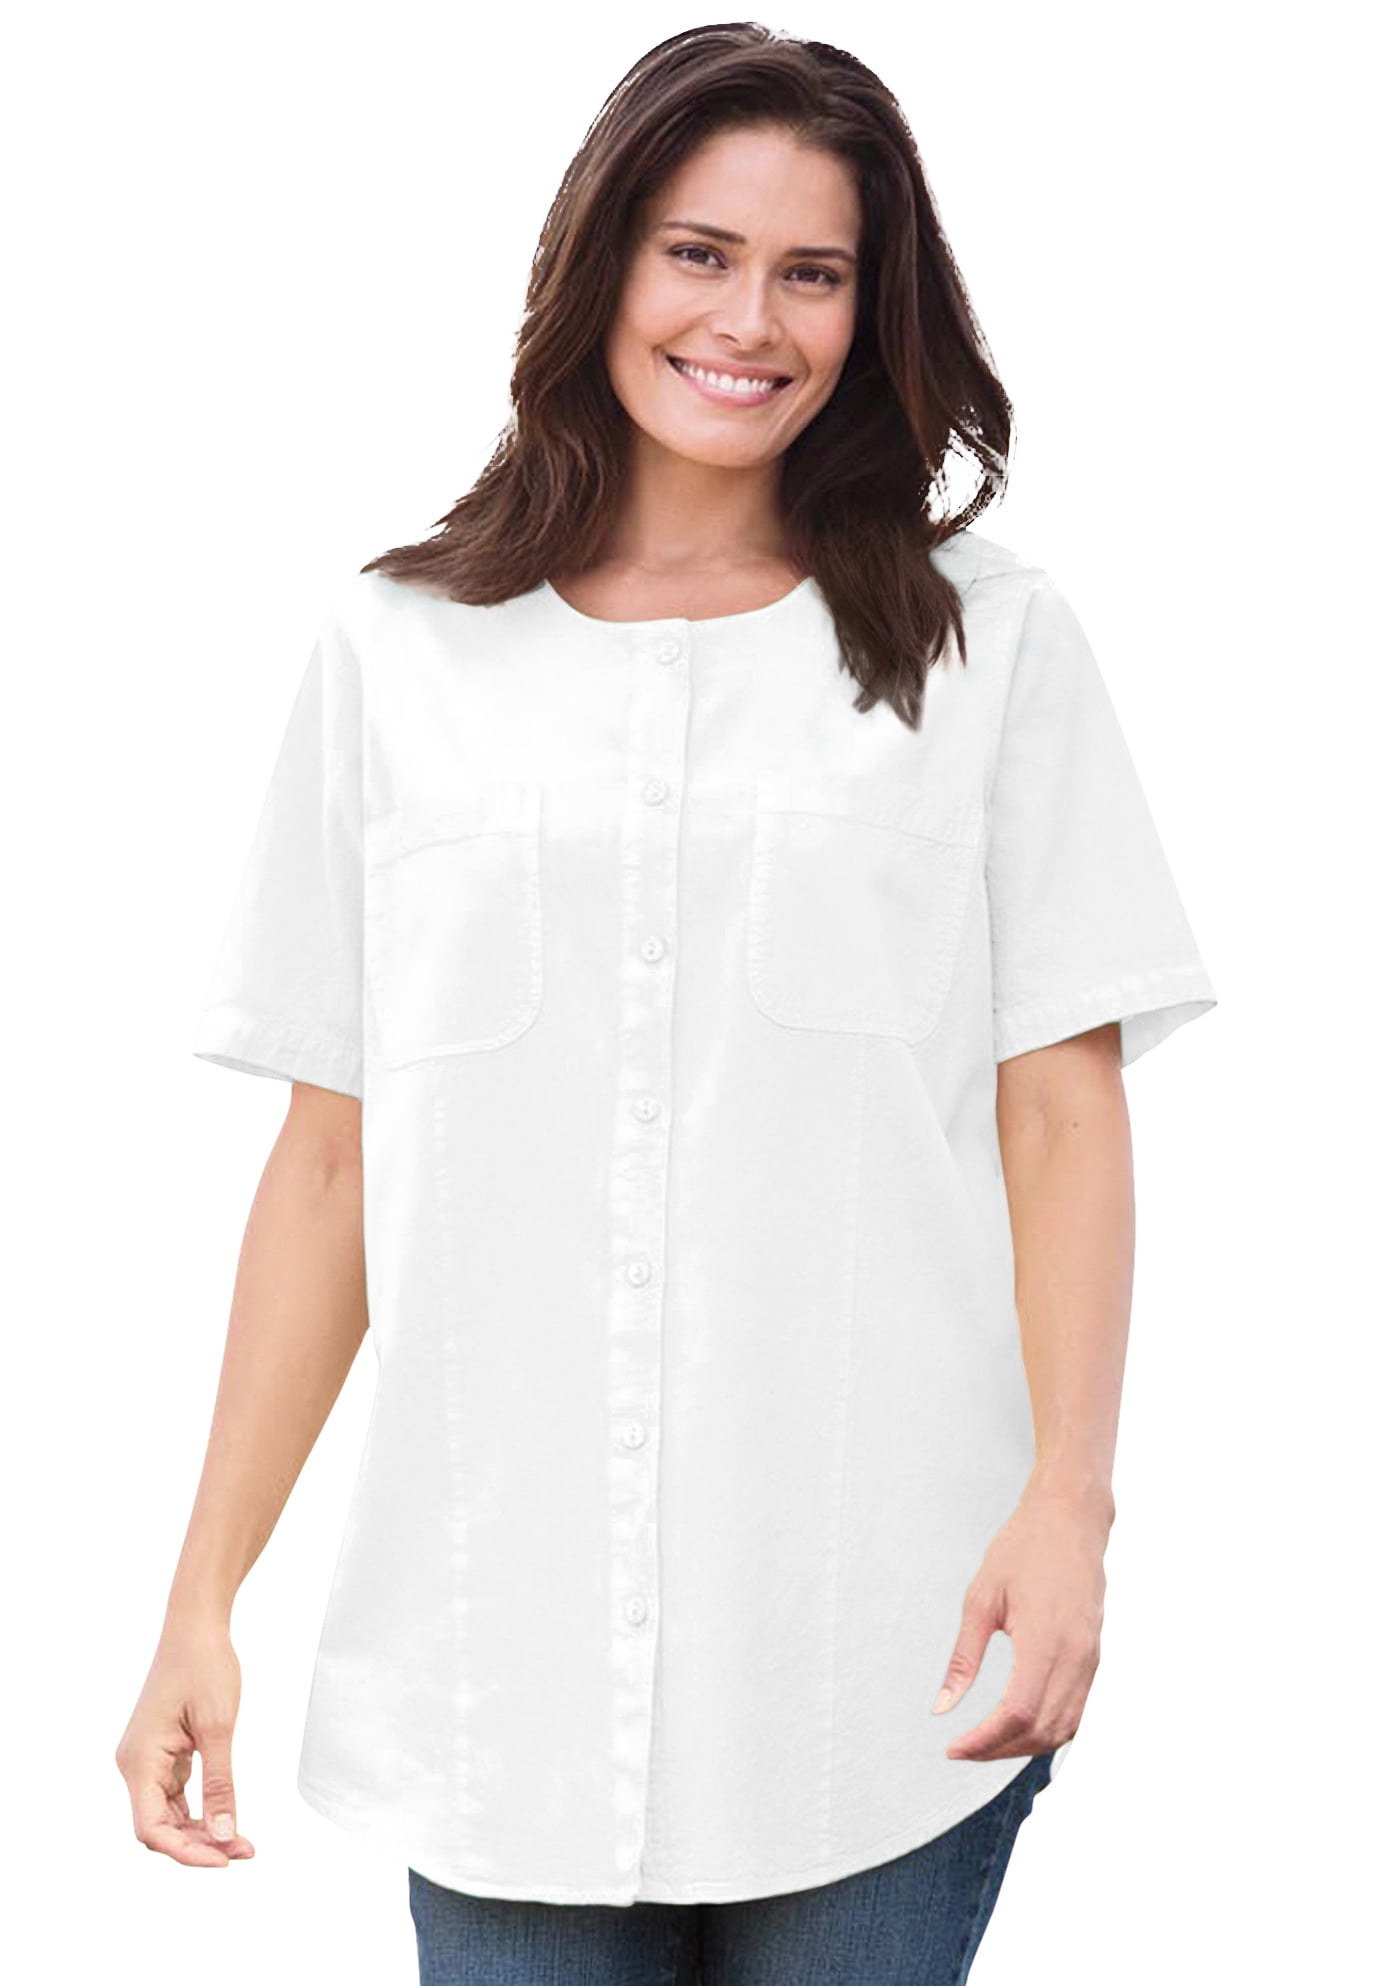 Woman Within - Woman Within Women's Plus Size Short Sleeve Crinkle ...